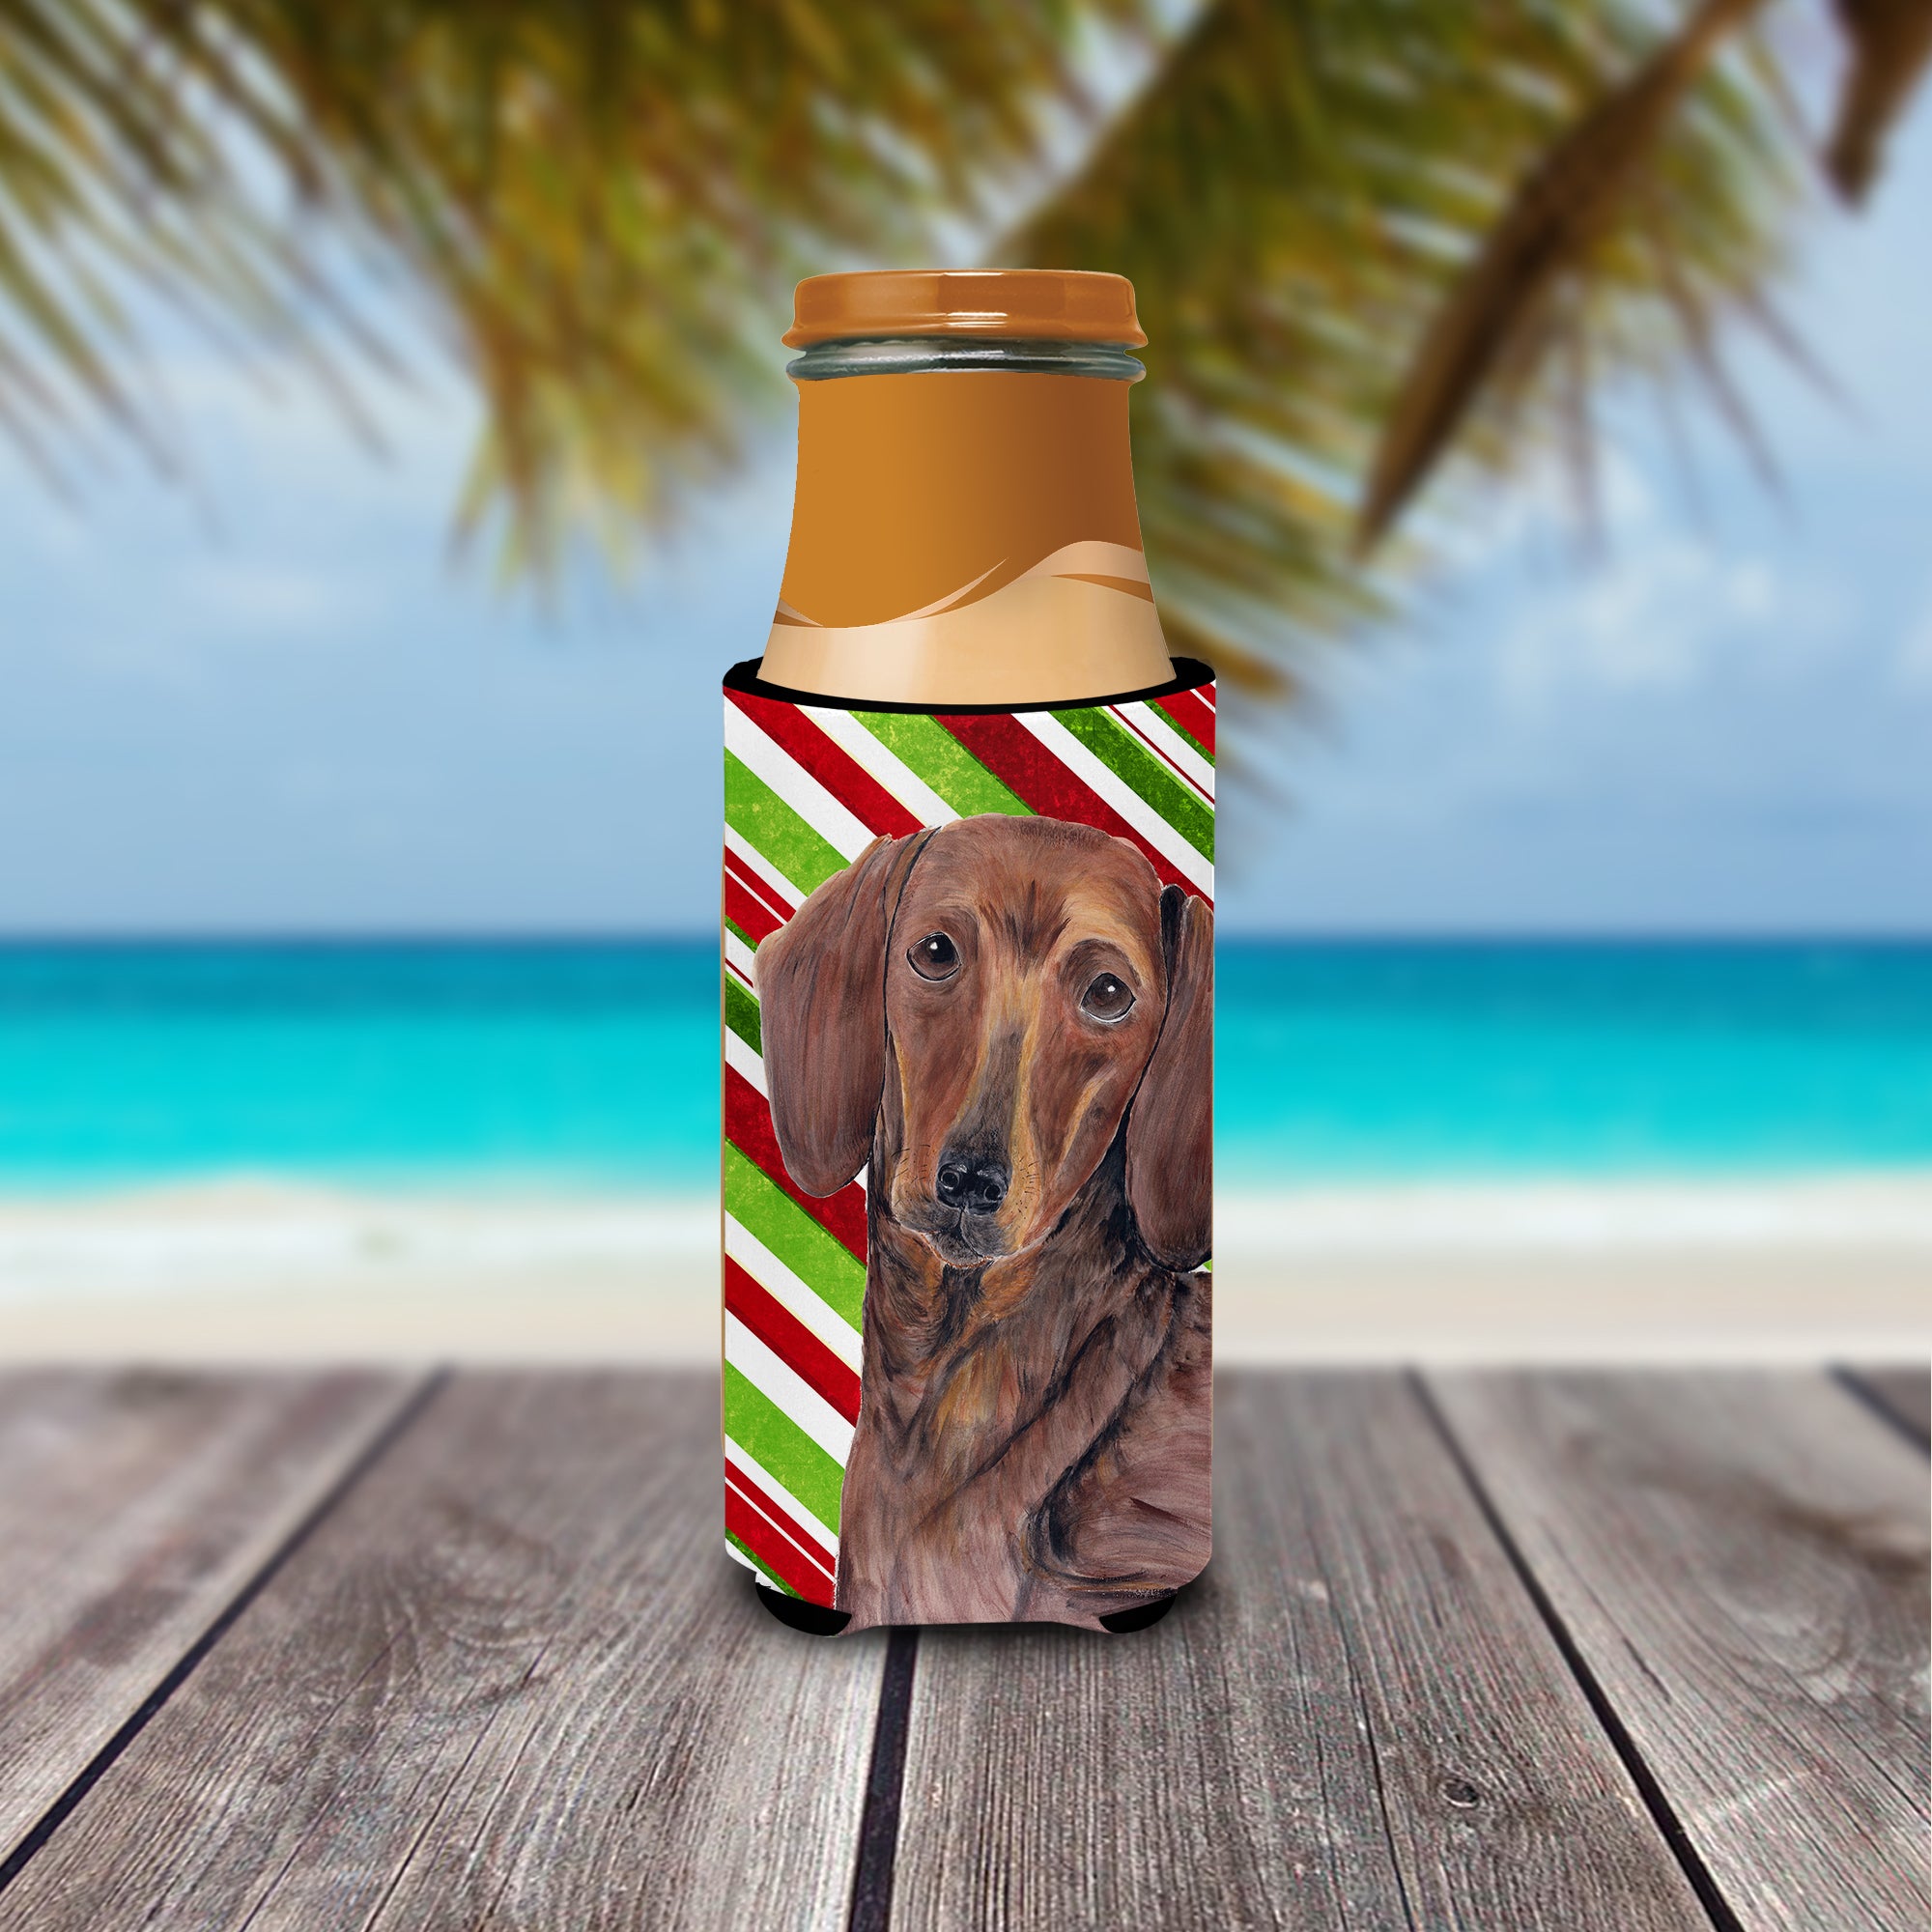 Dachshund Candy Cane Holiday Christmas Ultra Beverage Insulators for slim cans SC9328MUK.